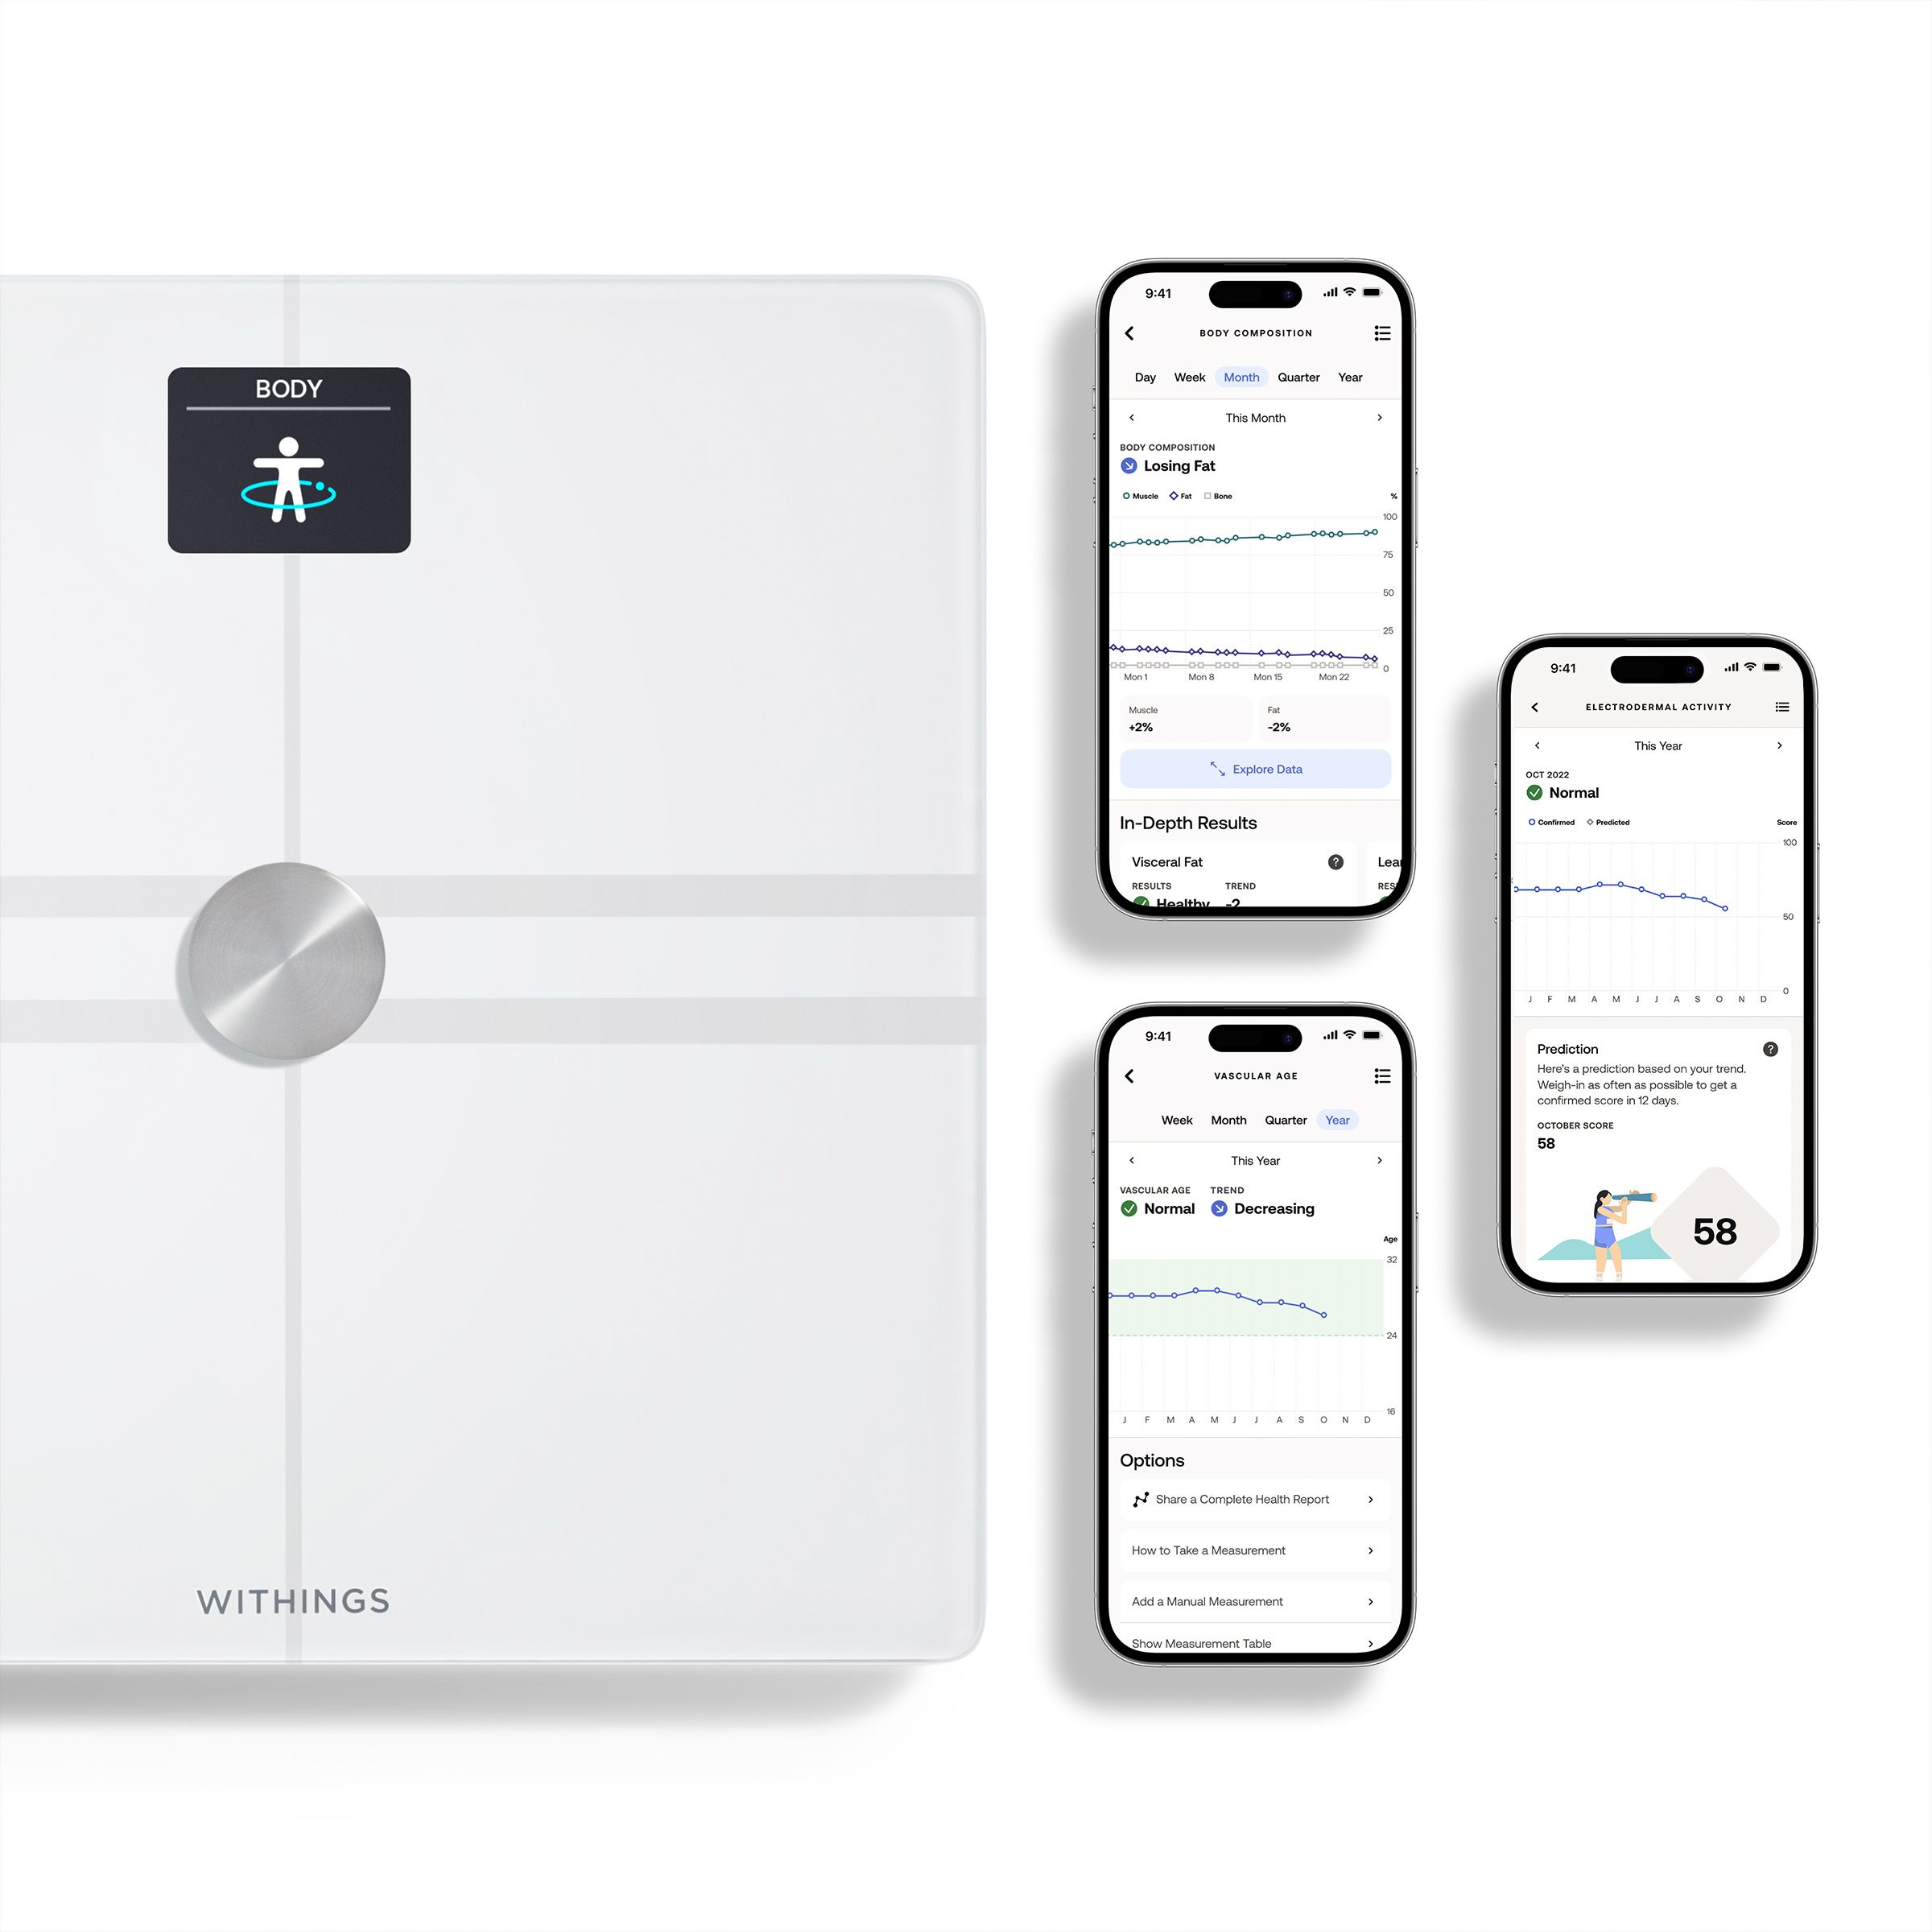 Withings Complete Body Composition Analysis Wi-Fi Smart Scale with LCD Color Screen - White